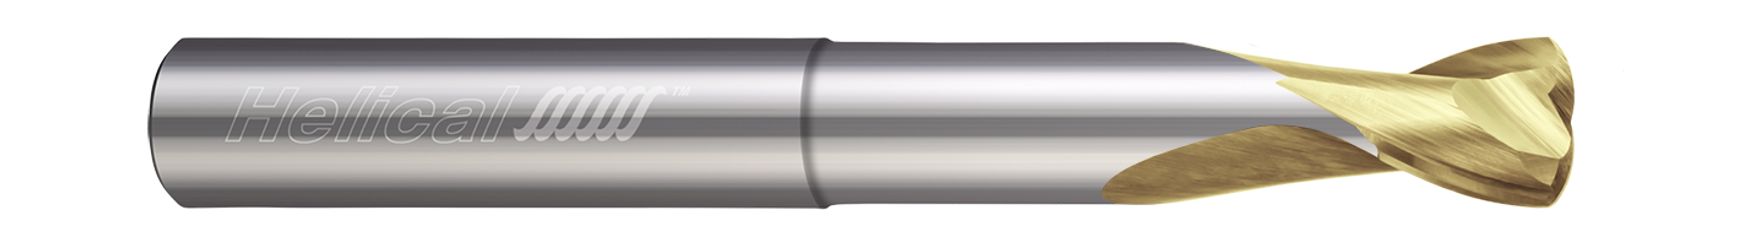 High Feed End Mills-Aluminum-Reduced Neck